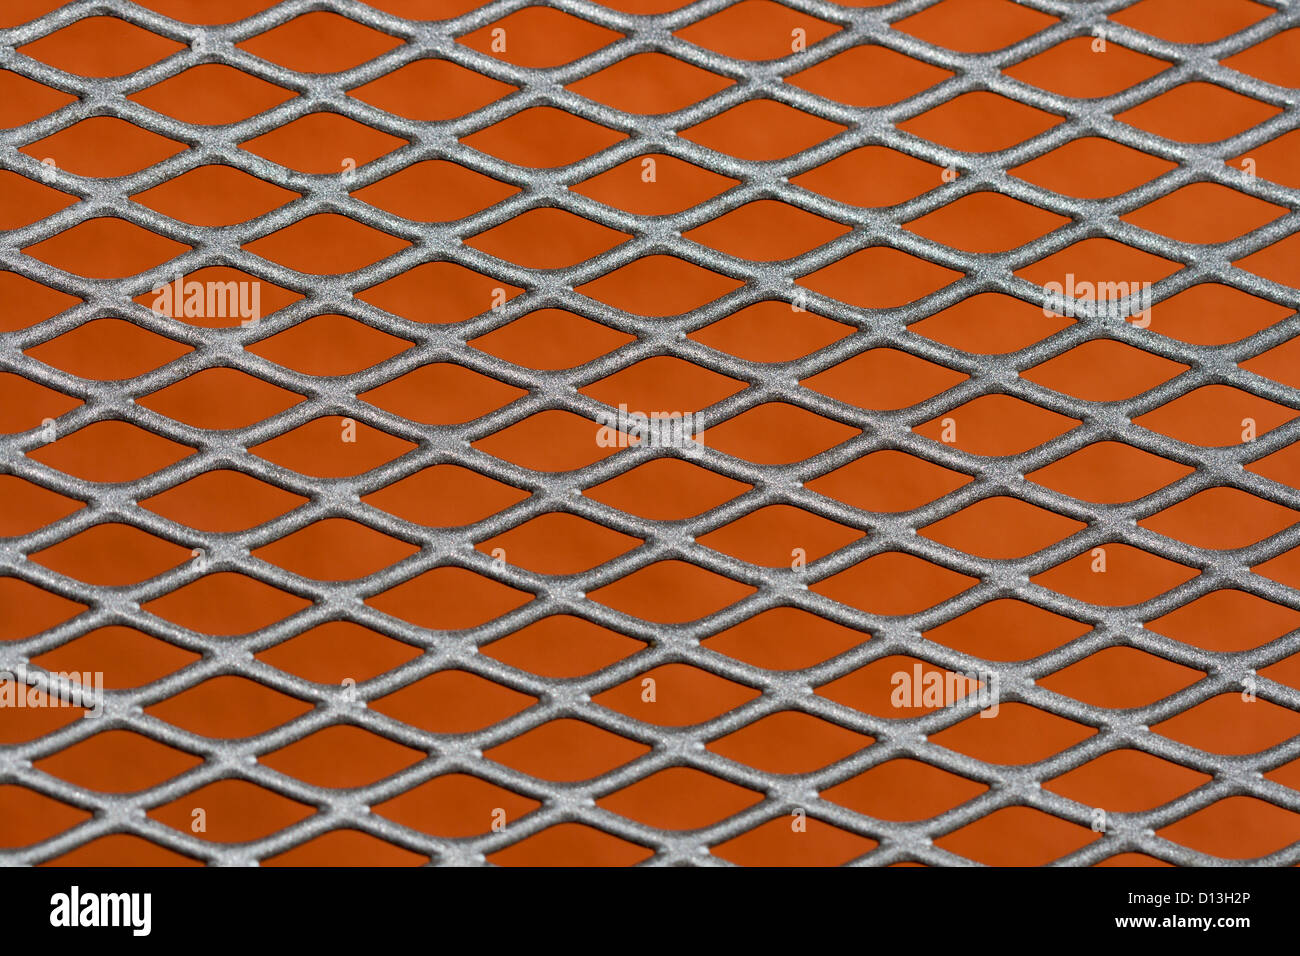 Abstract metal grating against red wall background Stock Photo